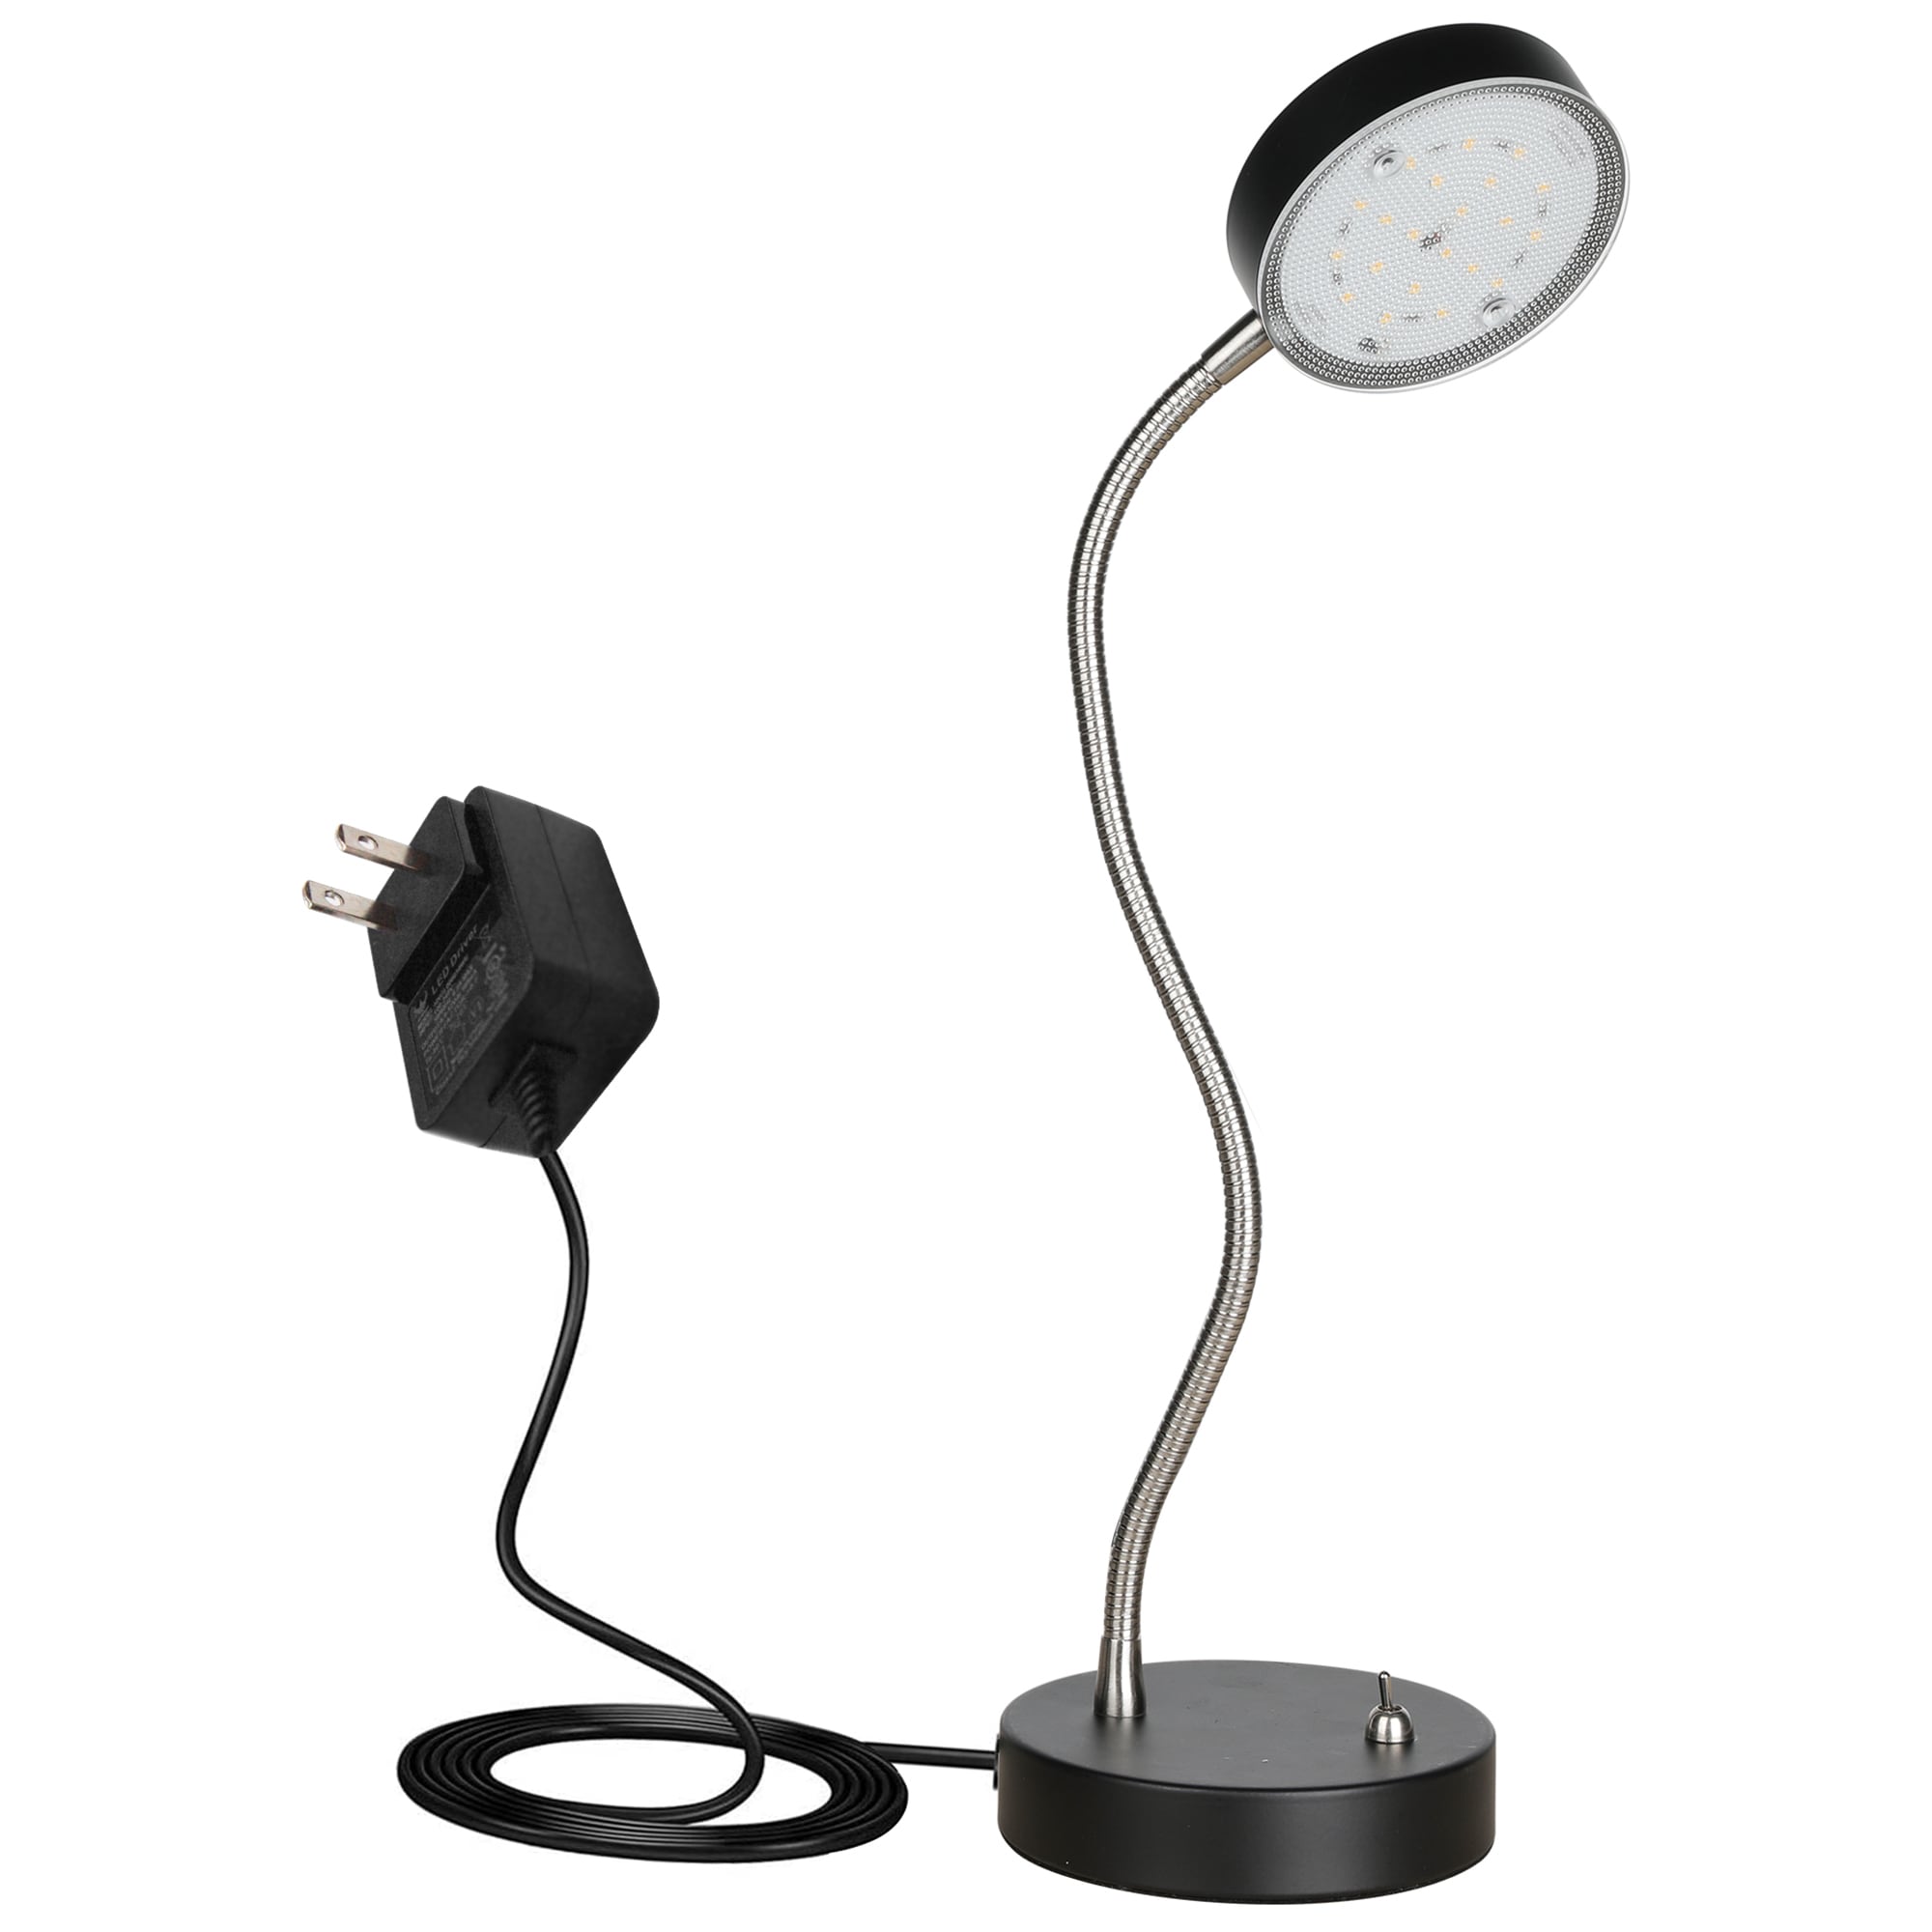 Gupuzm Led Desk Lamp with Clamp - Swing Arm Desk Lamp with 1 LED Cold Light  Bulbs 6500K - Adjustable Table Lamp，Used for Office, Work, Study